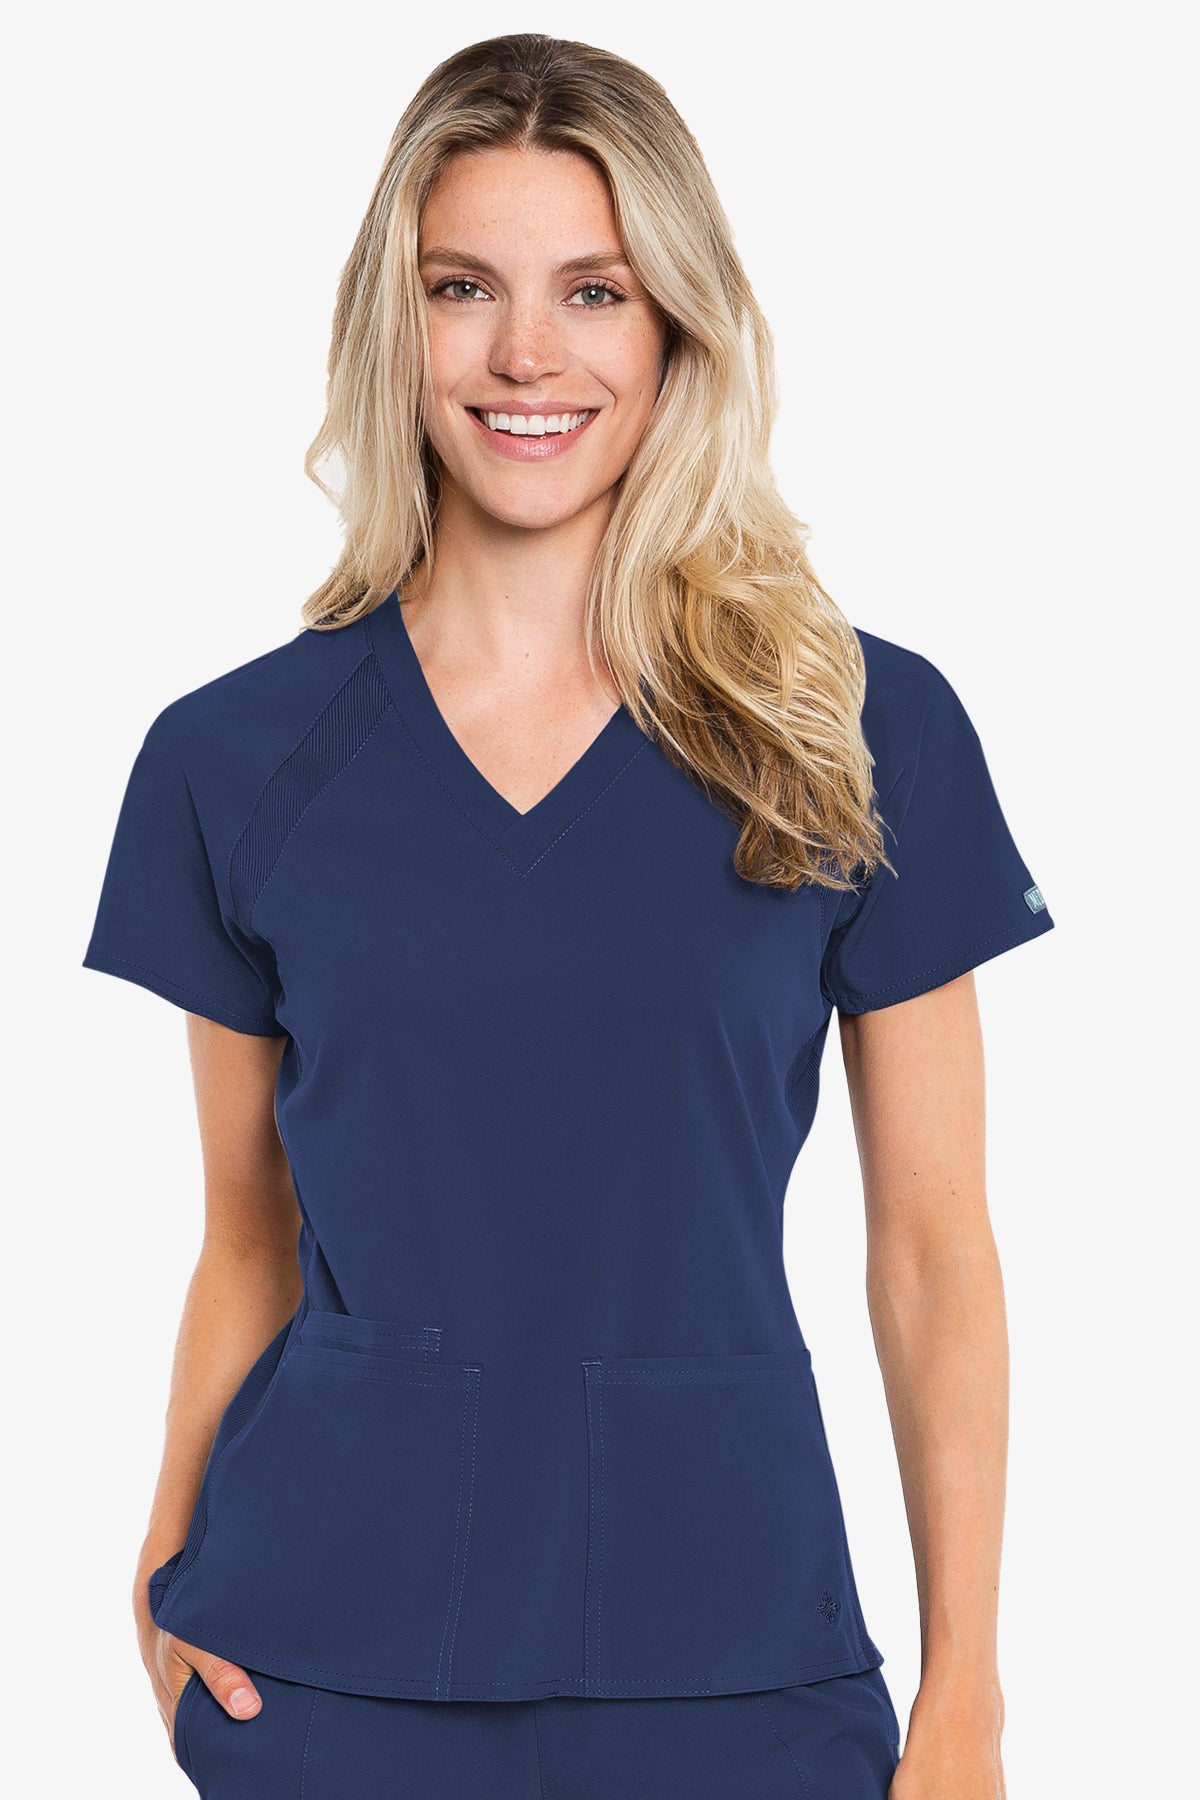 MED COUTURE Raglan Top #8470 - Butterfly Touch Scrubs